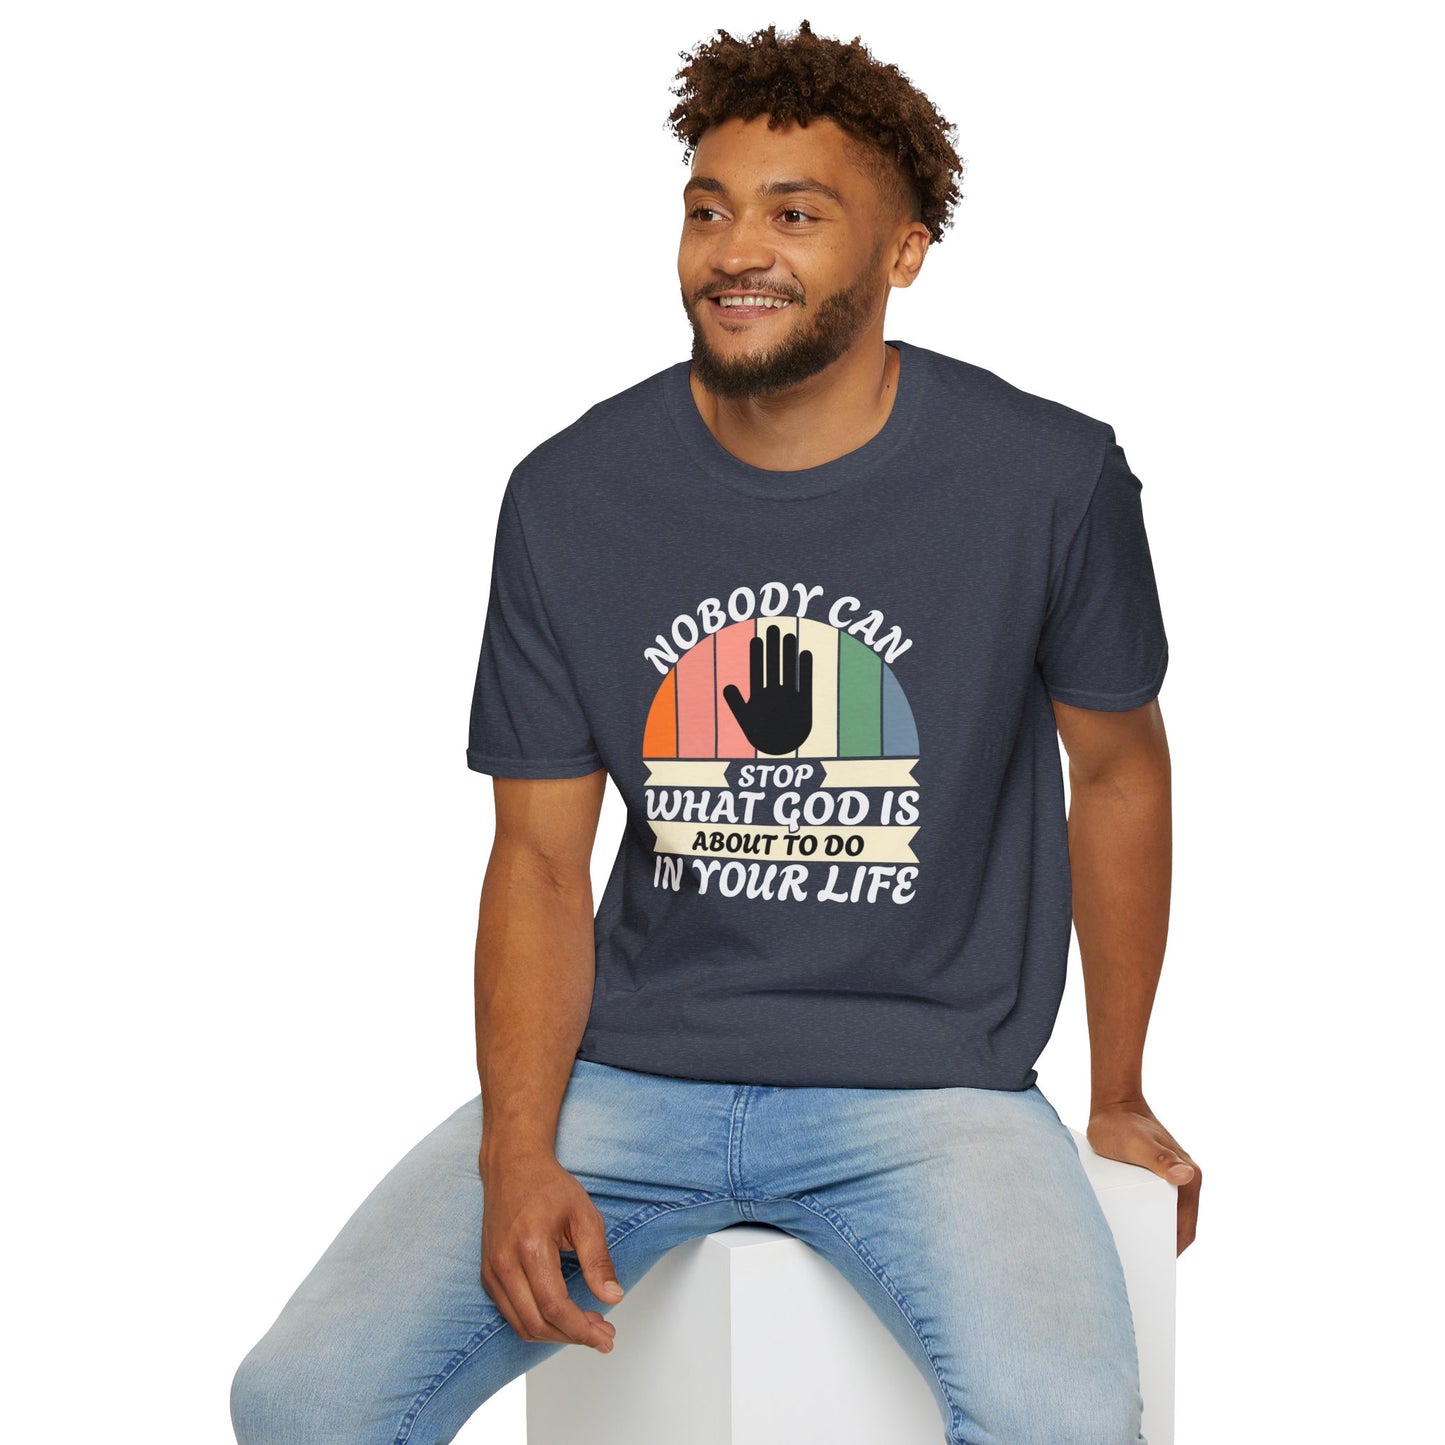 Nobody Can Stop What God Is About To Do In Your Life  Unisex Christian T-shirt